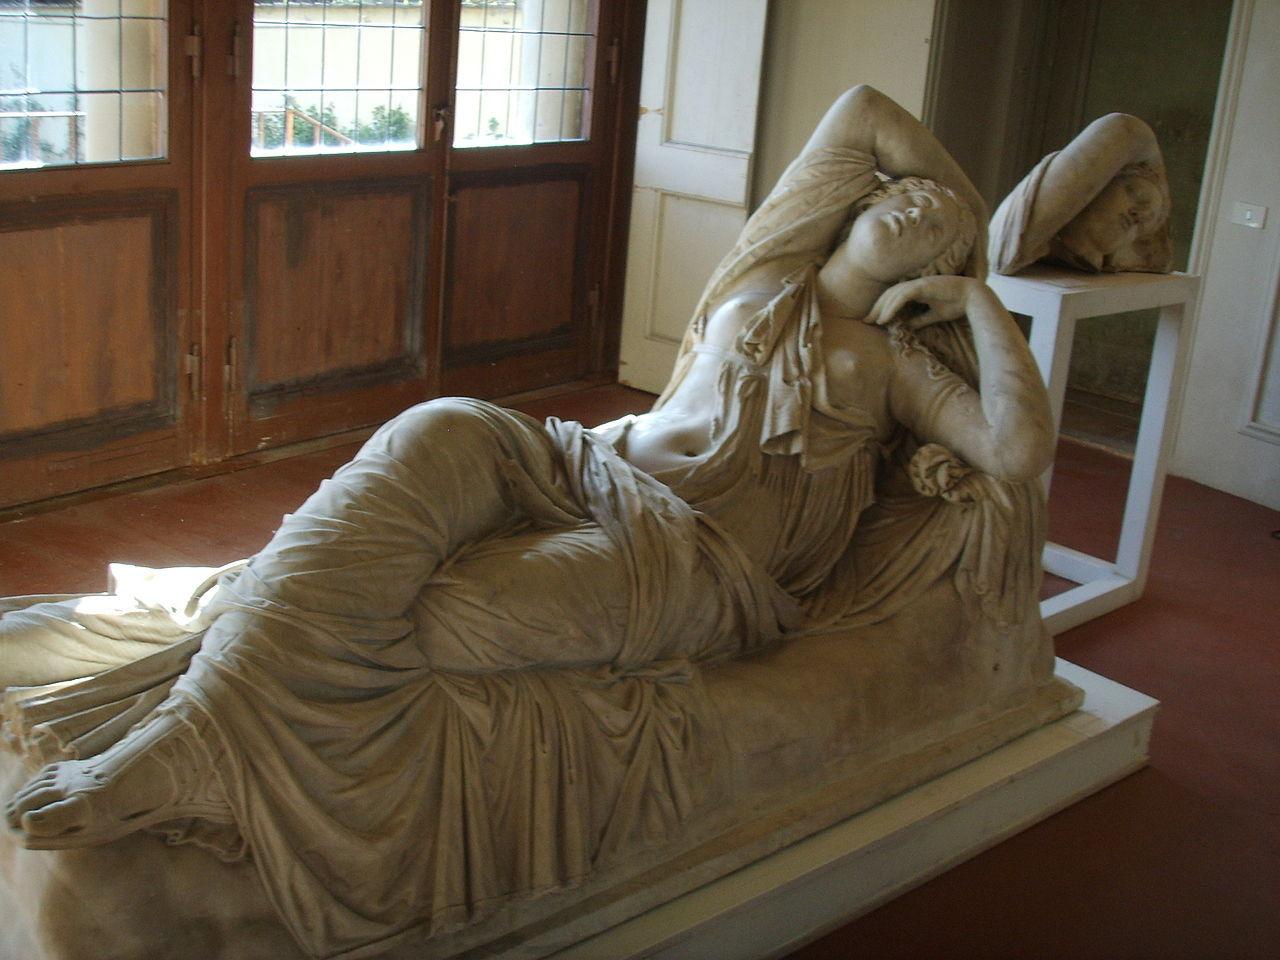 Italian finely carved Alabaster Marble Sculpture of  The Sleeping Ariadne Head.
Inspired from the Roman copy after the Hellenistic Pergamene School original of the 2nd century BC, and one of the most beloved sculptures of antiquity, representing